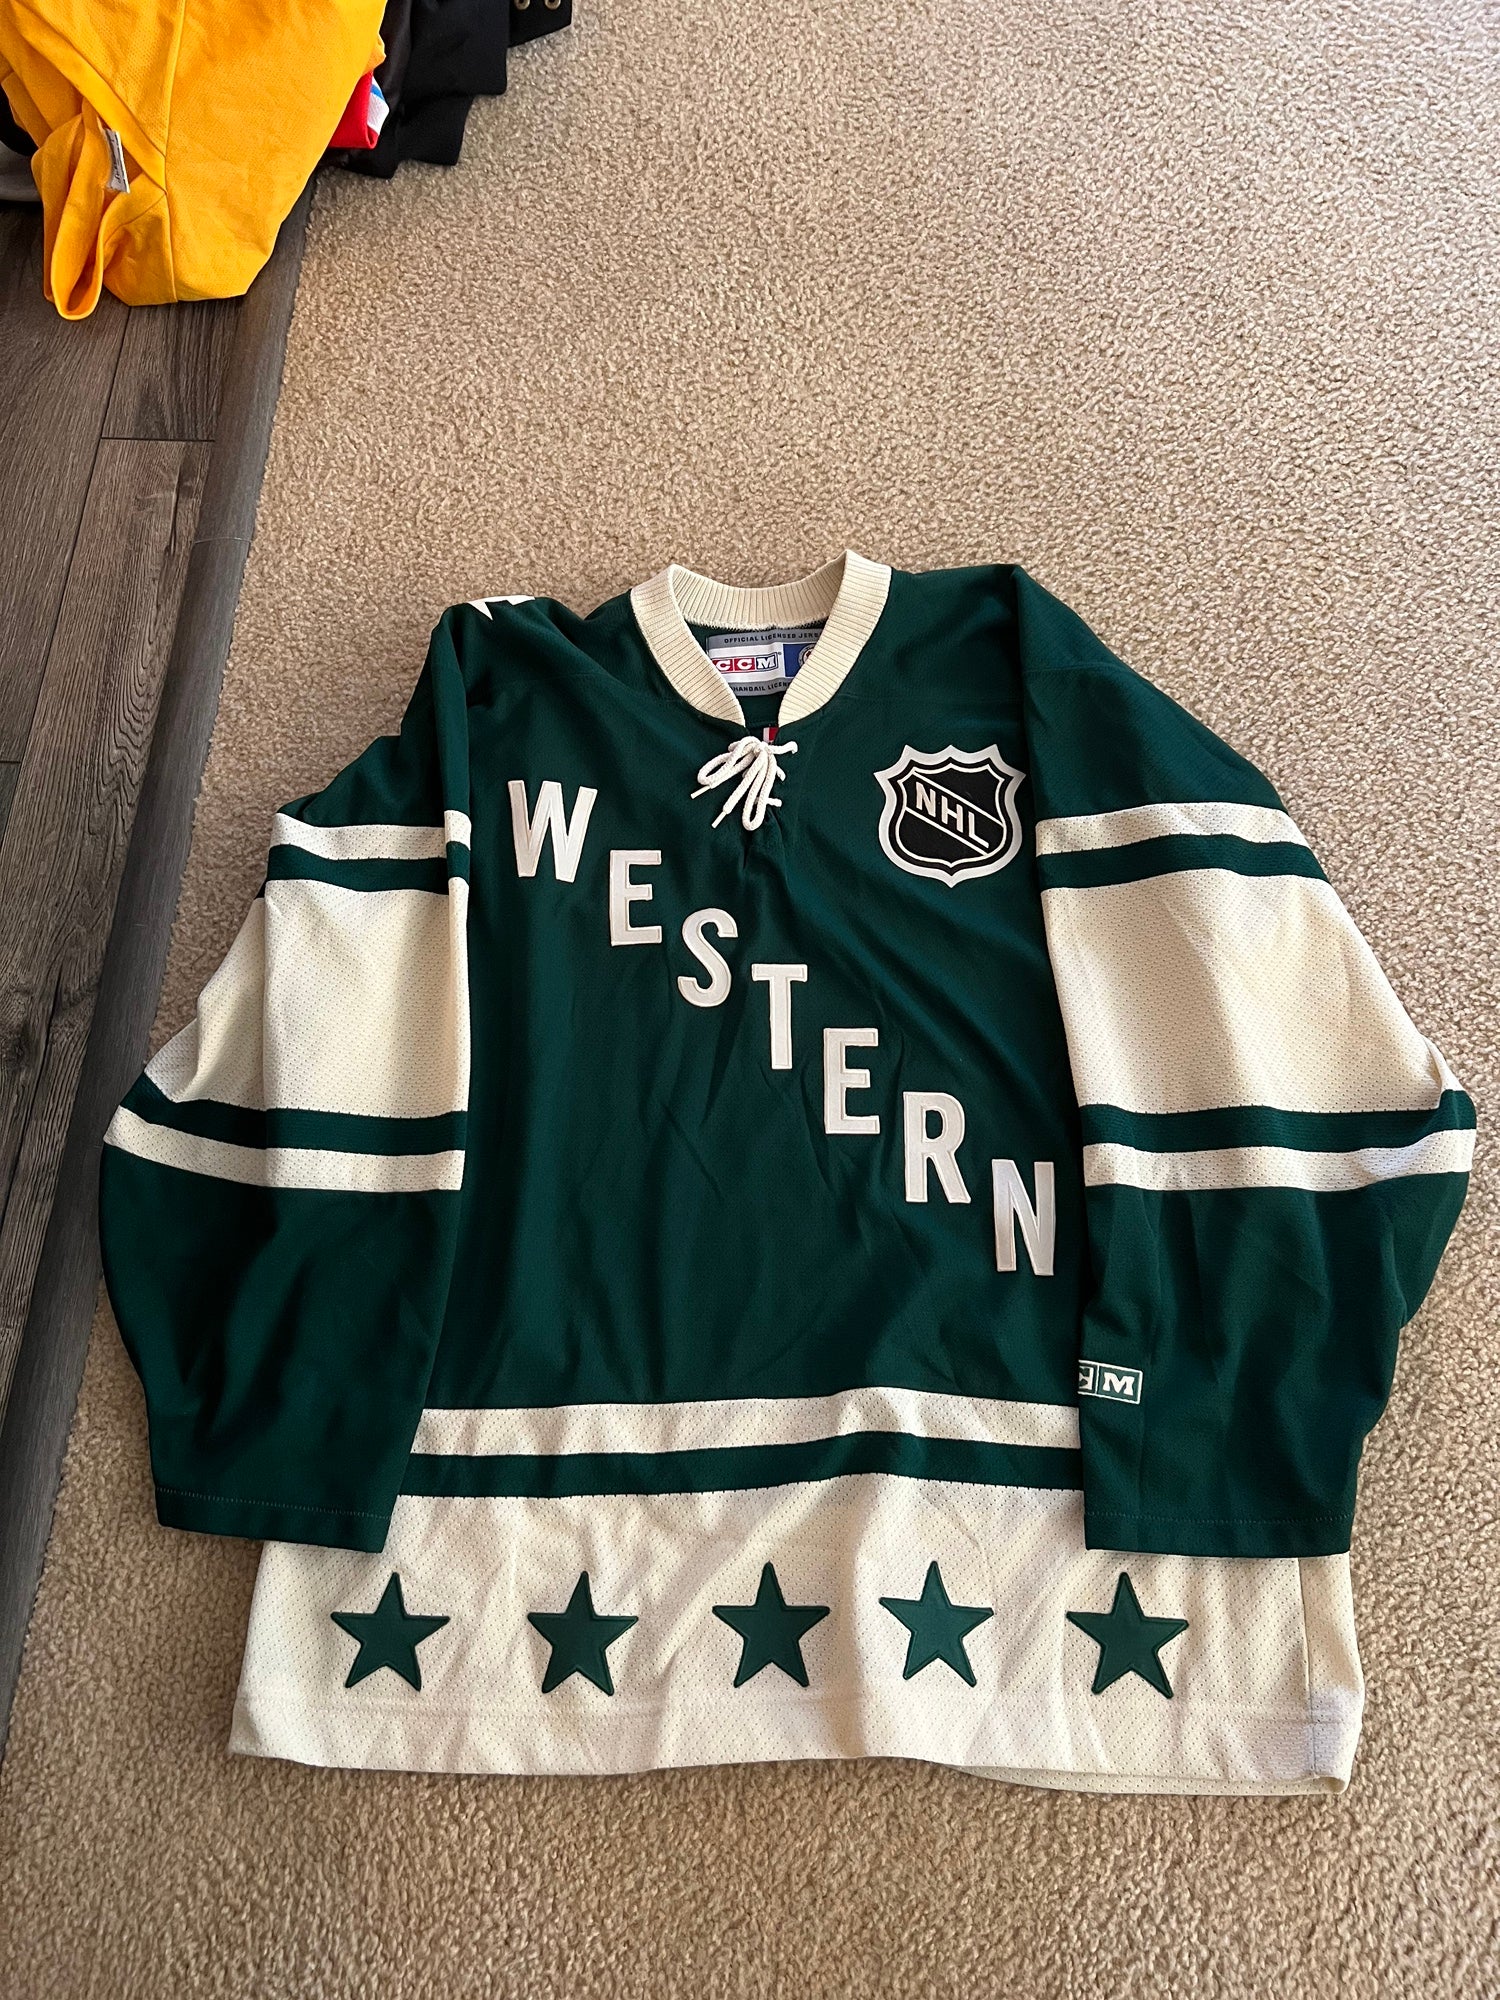 Jrami618 2004 NHL All Star Game Western Conference CCM Sewn Jersey Size Adult Medium